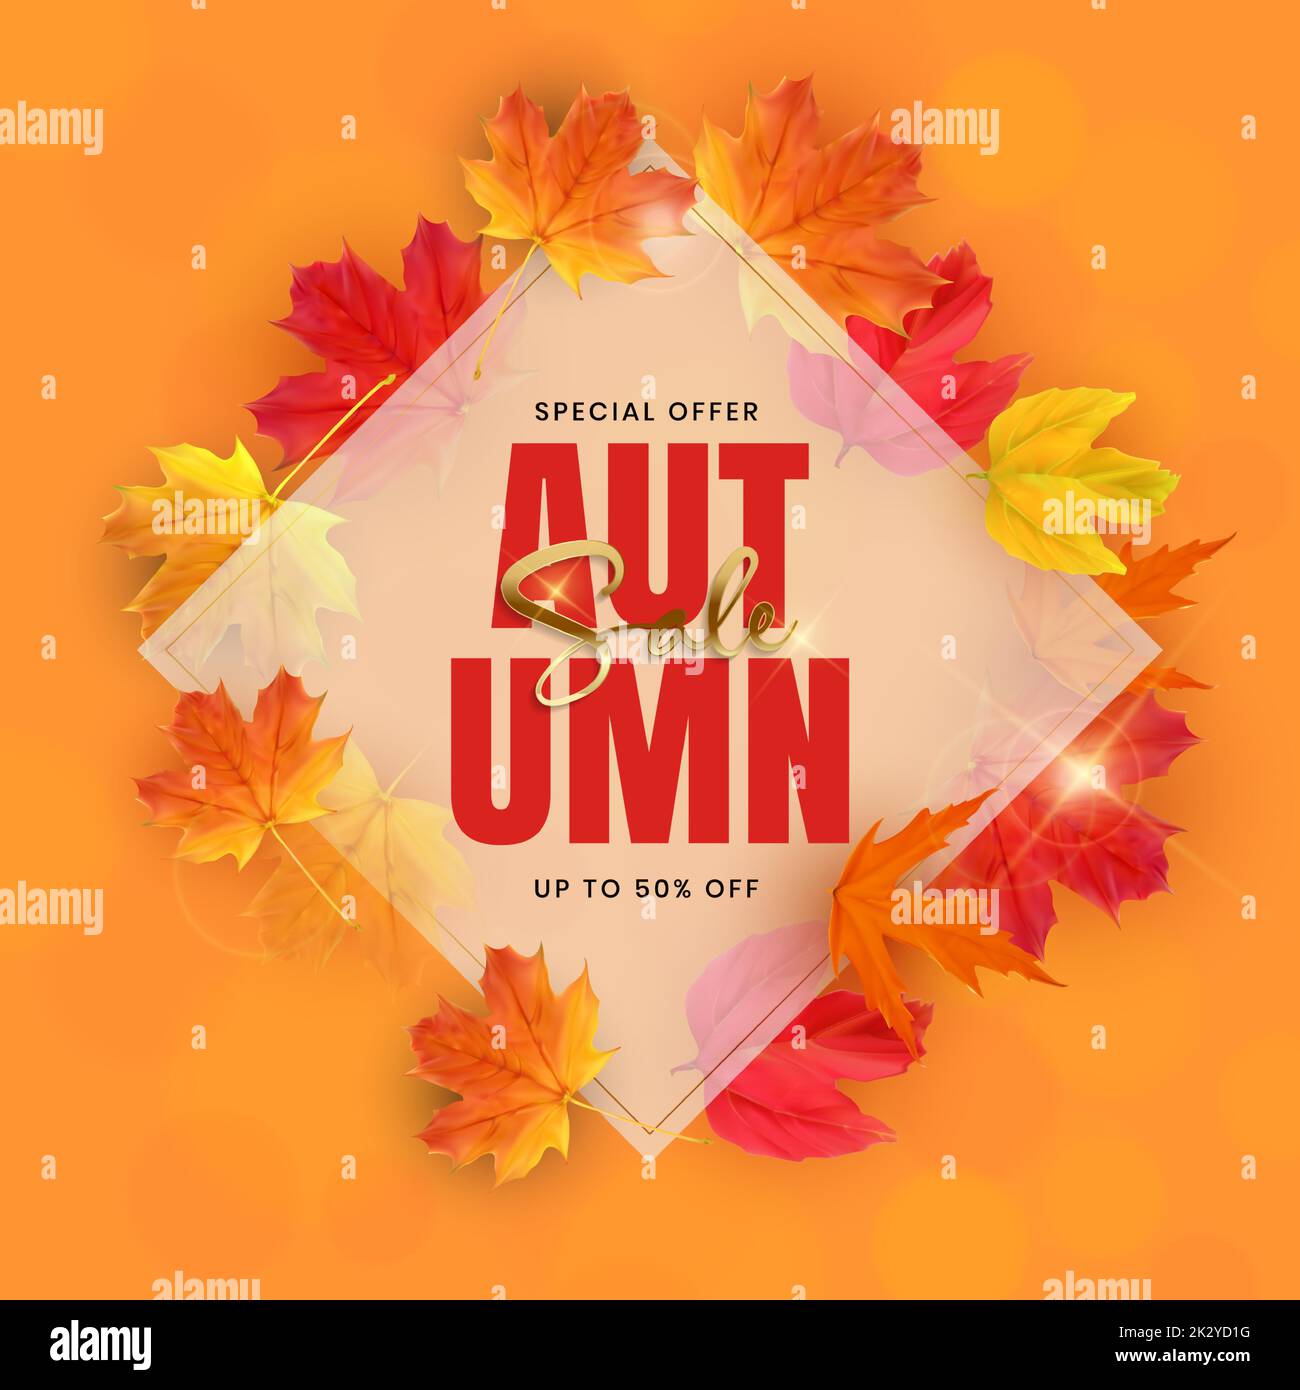 Autumn Sale Poster with Falling Leaves. Vector Illustration Stock Vector